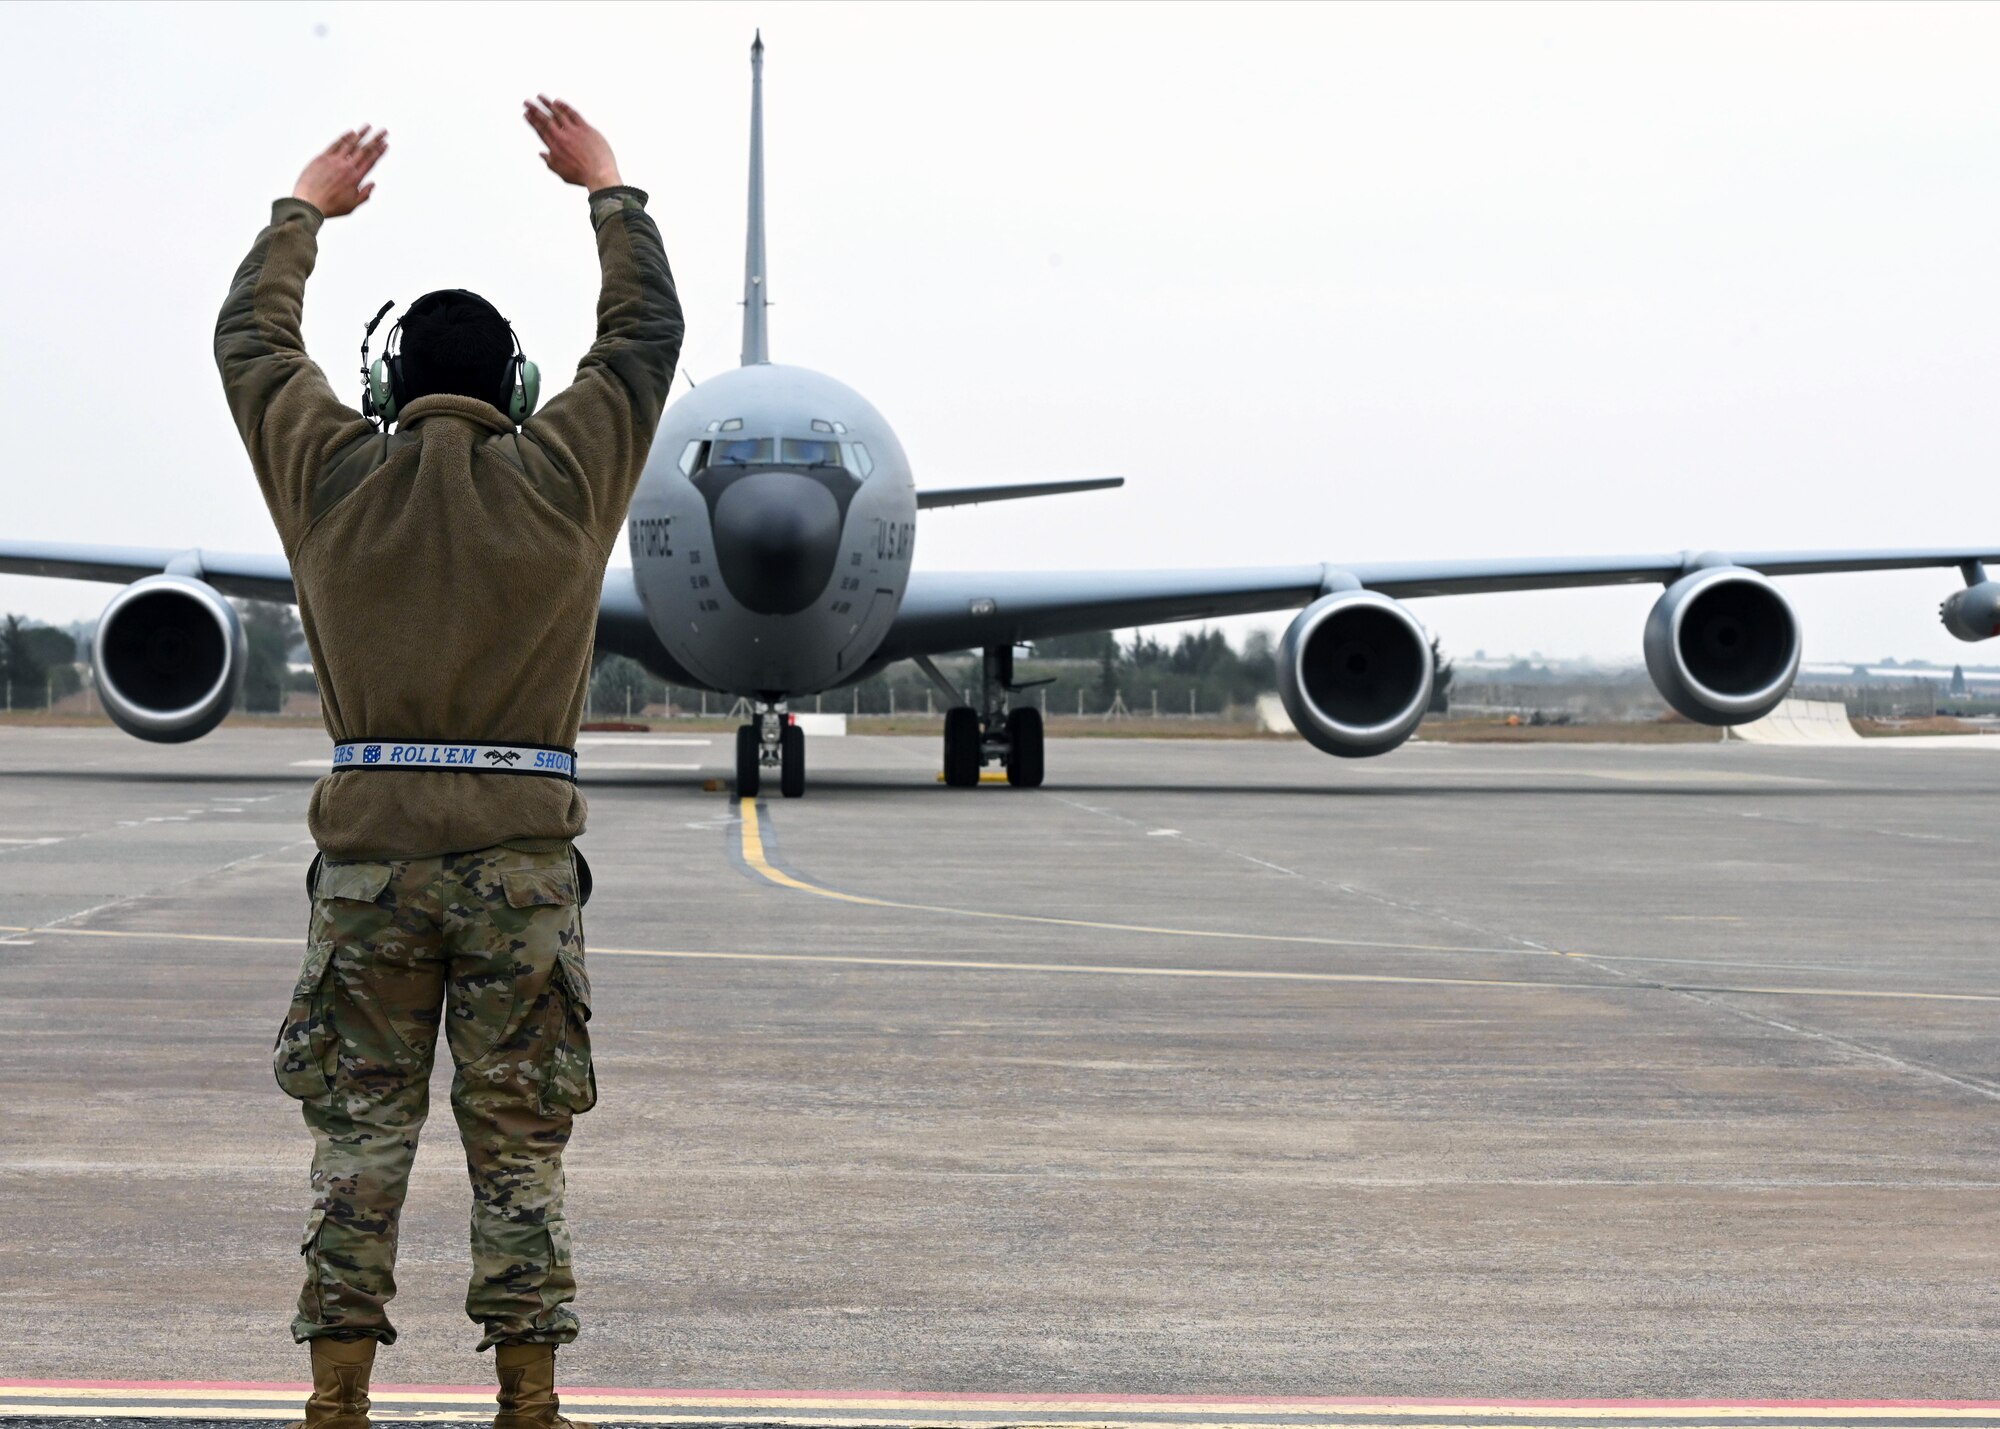 Airmen assigned to the 384th Expeditionary Air Refueling Squadron and the 55th Expeditionary Fighter Generation Squadron refuel a KC-135 Stratotanker at Incirlik Air Base, Turkey, Feb. 3, 2022. The 384th EARS trained the 55th EFGS as part of an Agile Combat Employment event, enabling Airmen to operate from various locations and deliver lethal combat power across the spectrum of military operations.